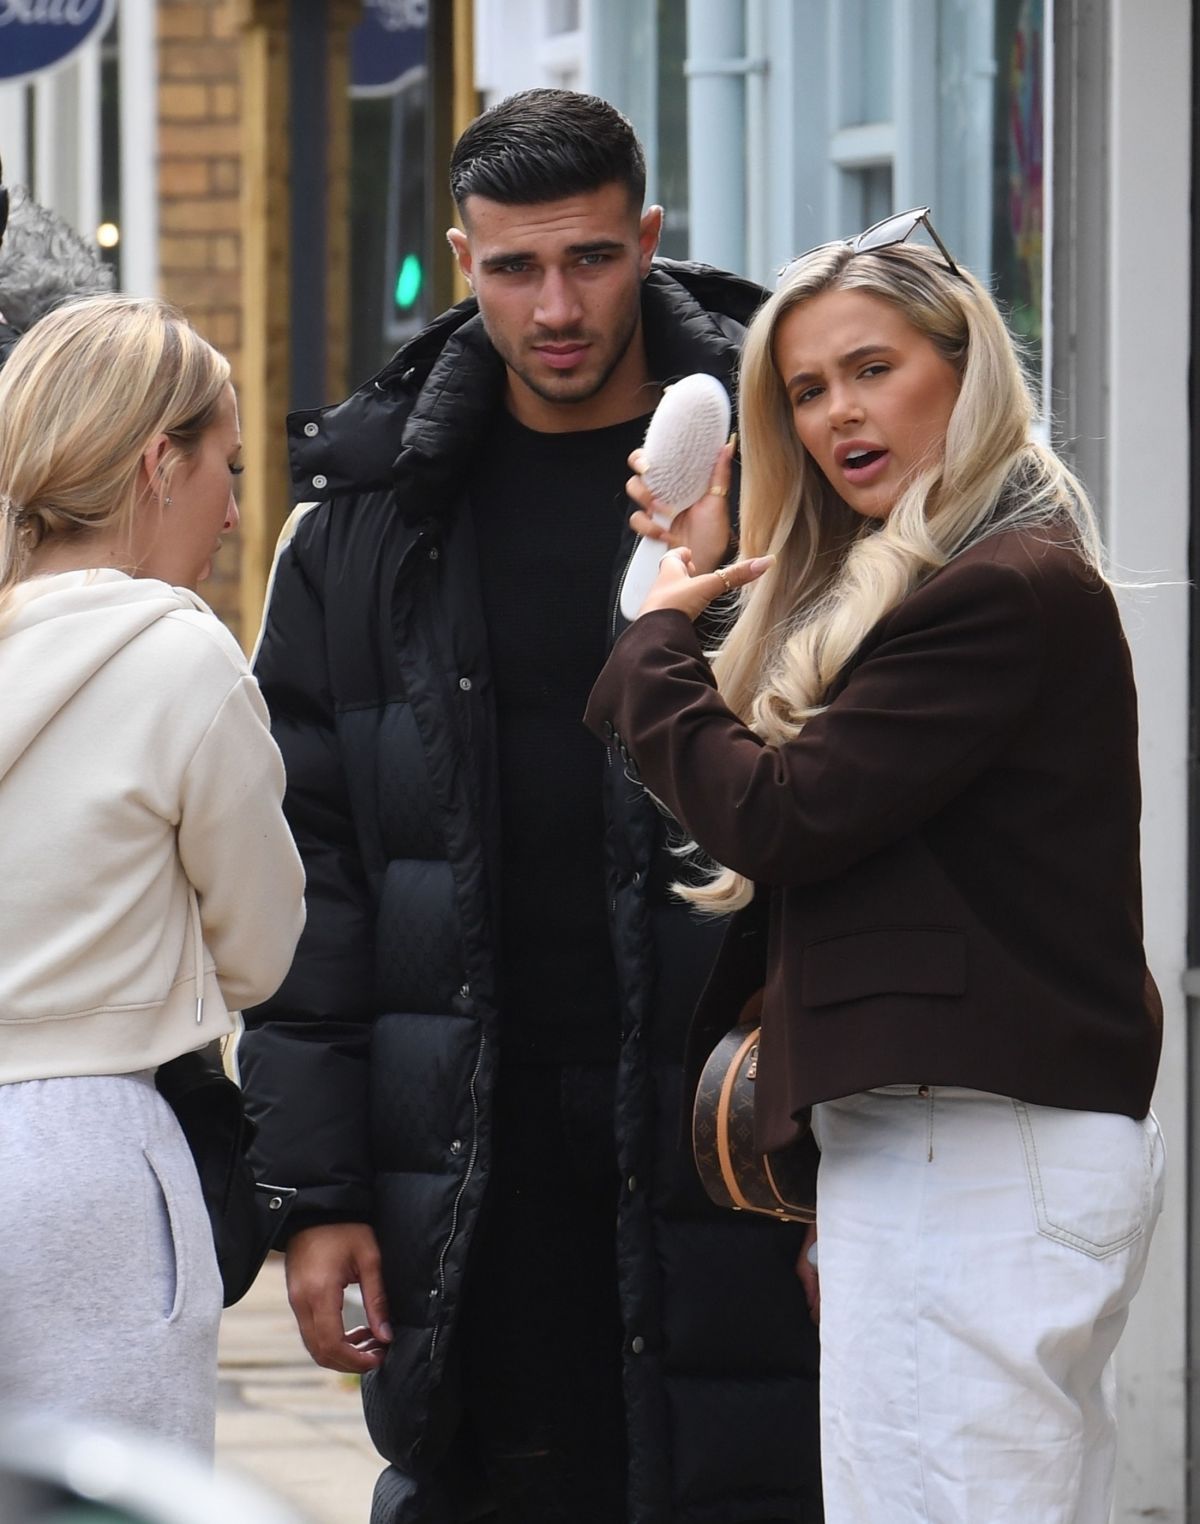 MOLLY MAE HAGUE and Tommy Fury Out in Cheshire 07/30/2020 – HawtCelebs